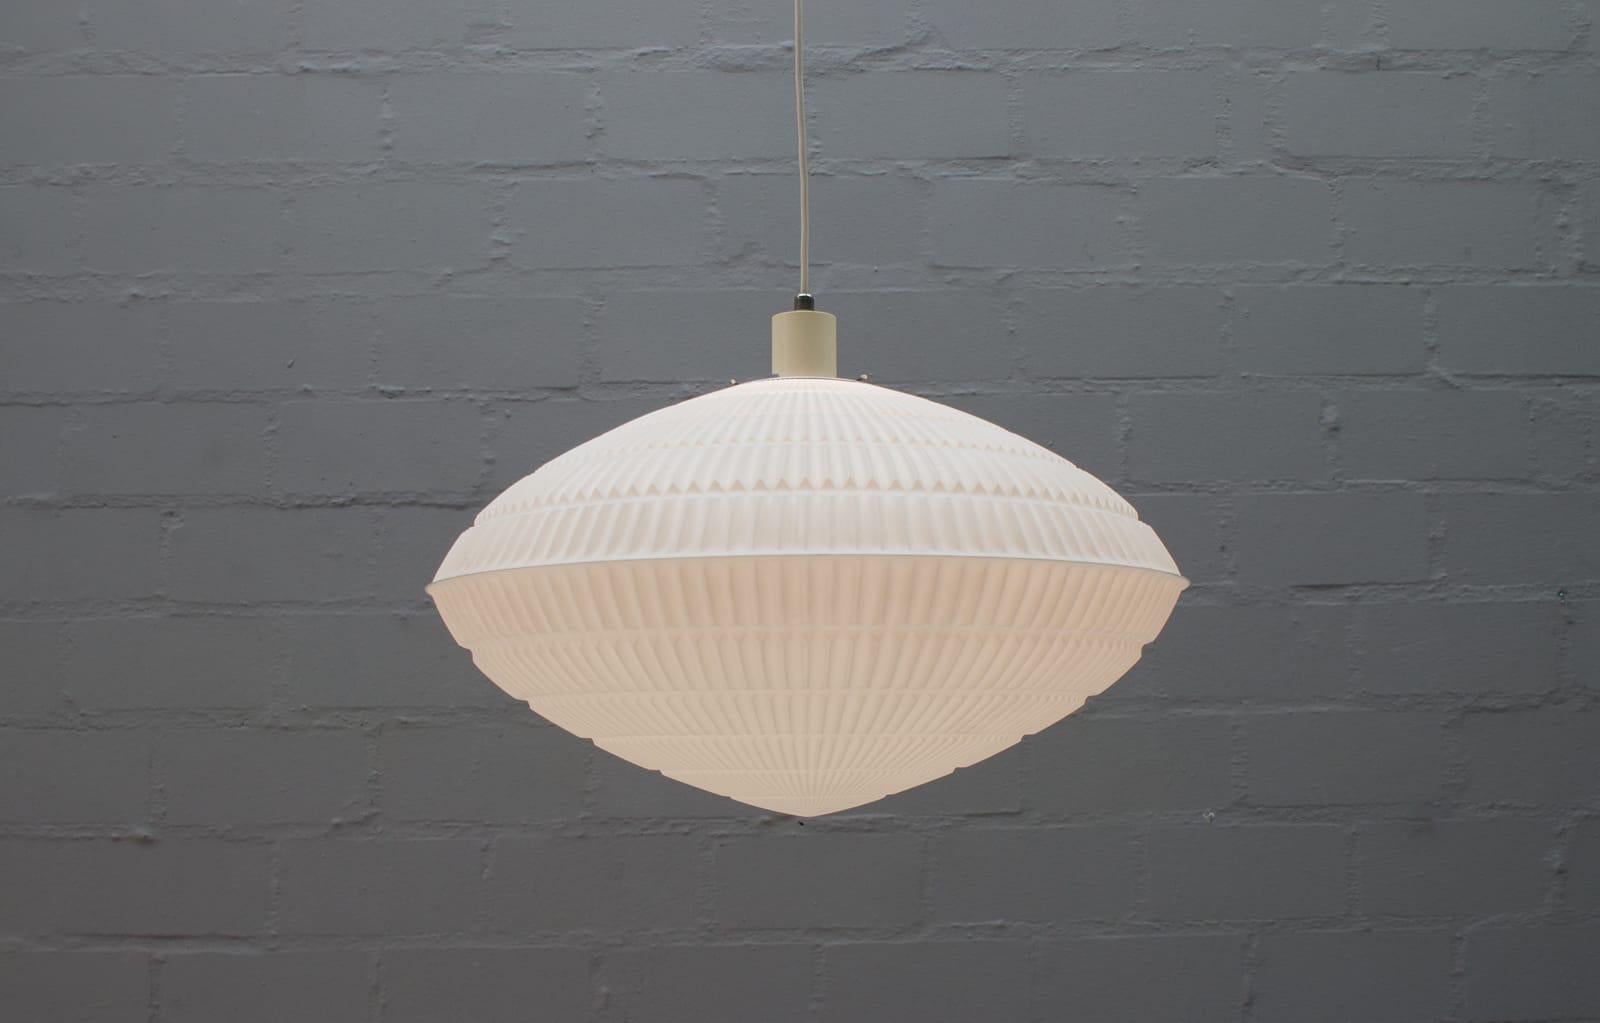 Mid-20th Century Geometric Pendant Lamp by Aloys F. Gangkofner for Erco Leuchten, Germany, 1960s For Sale